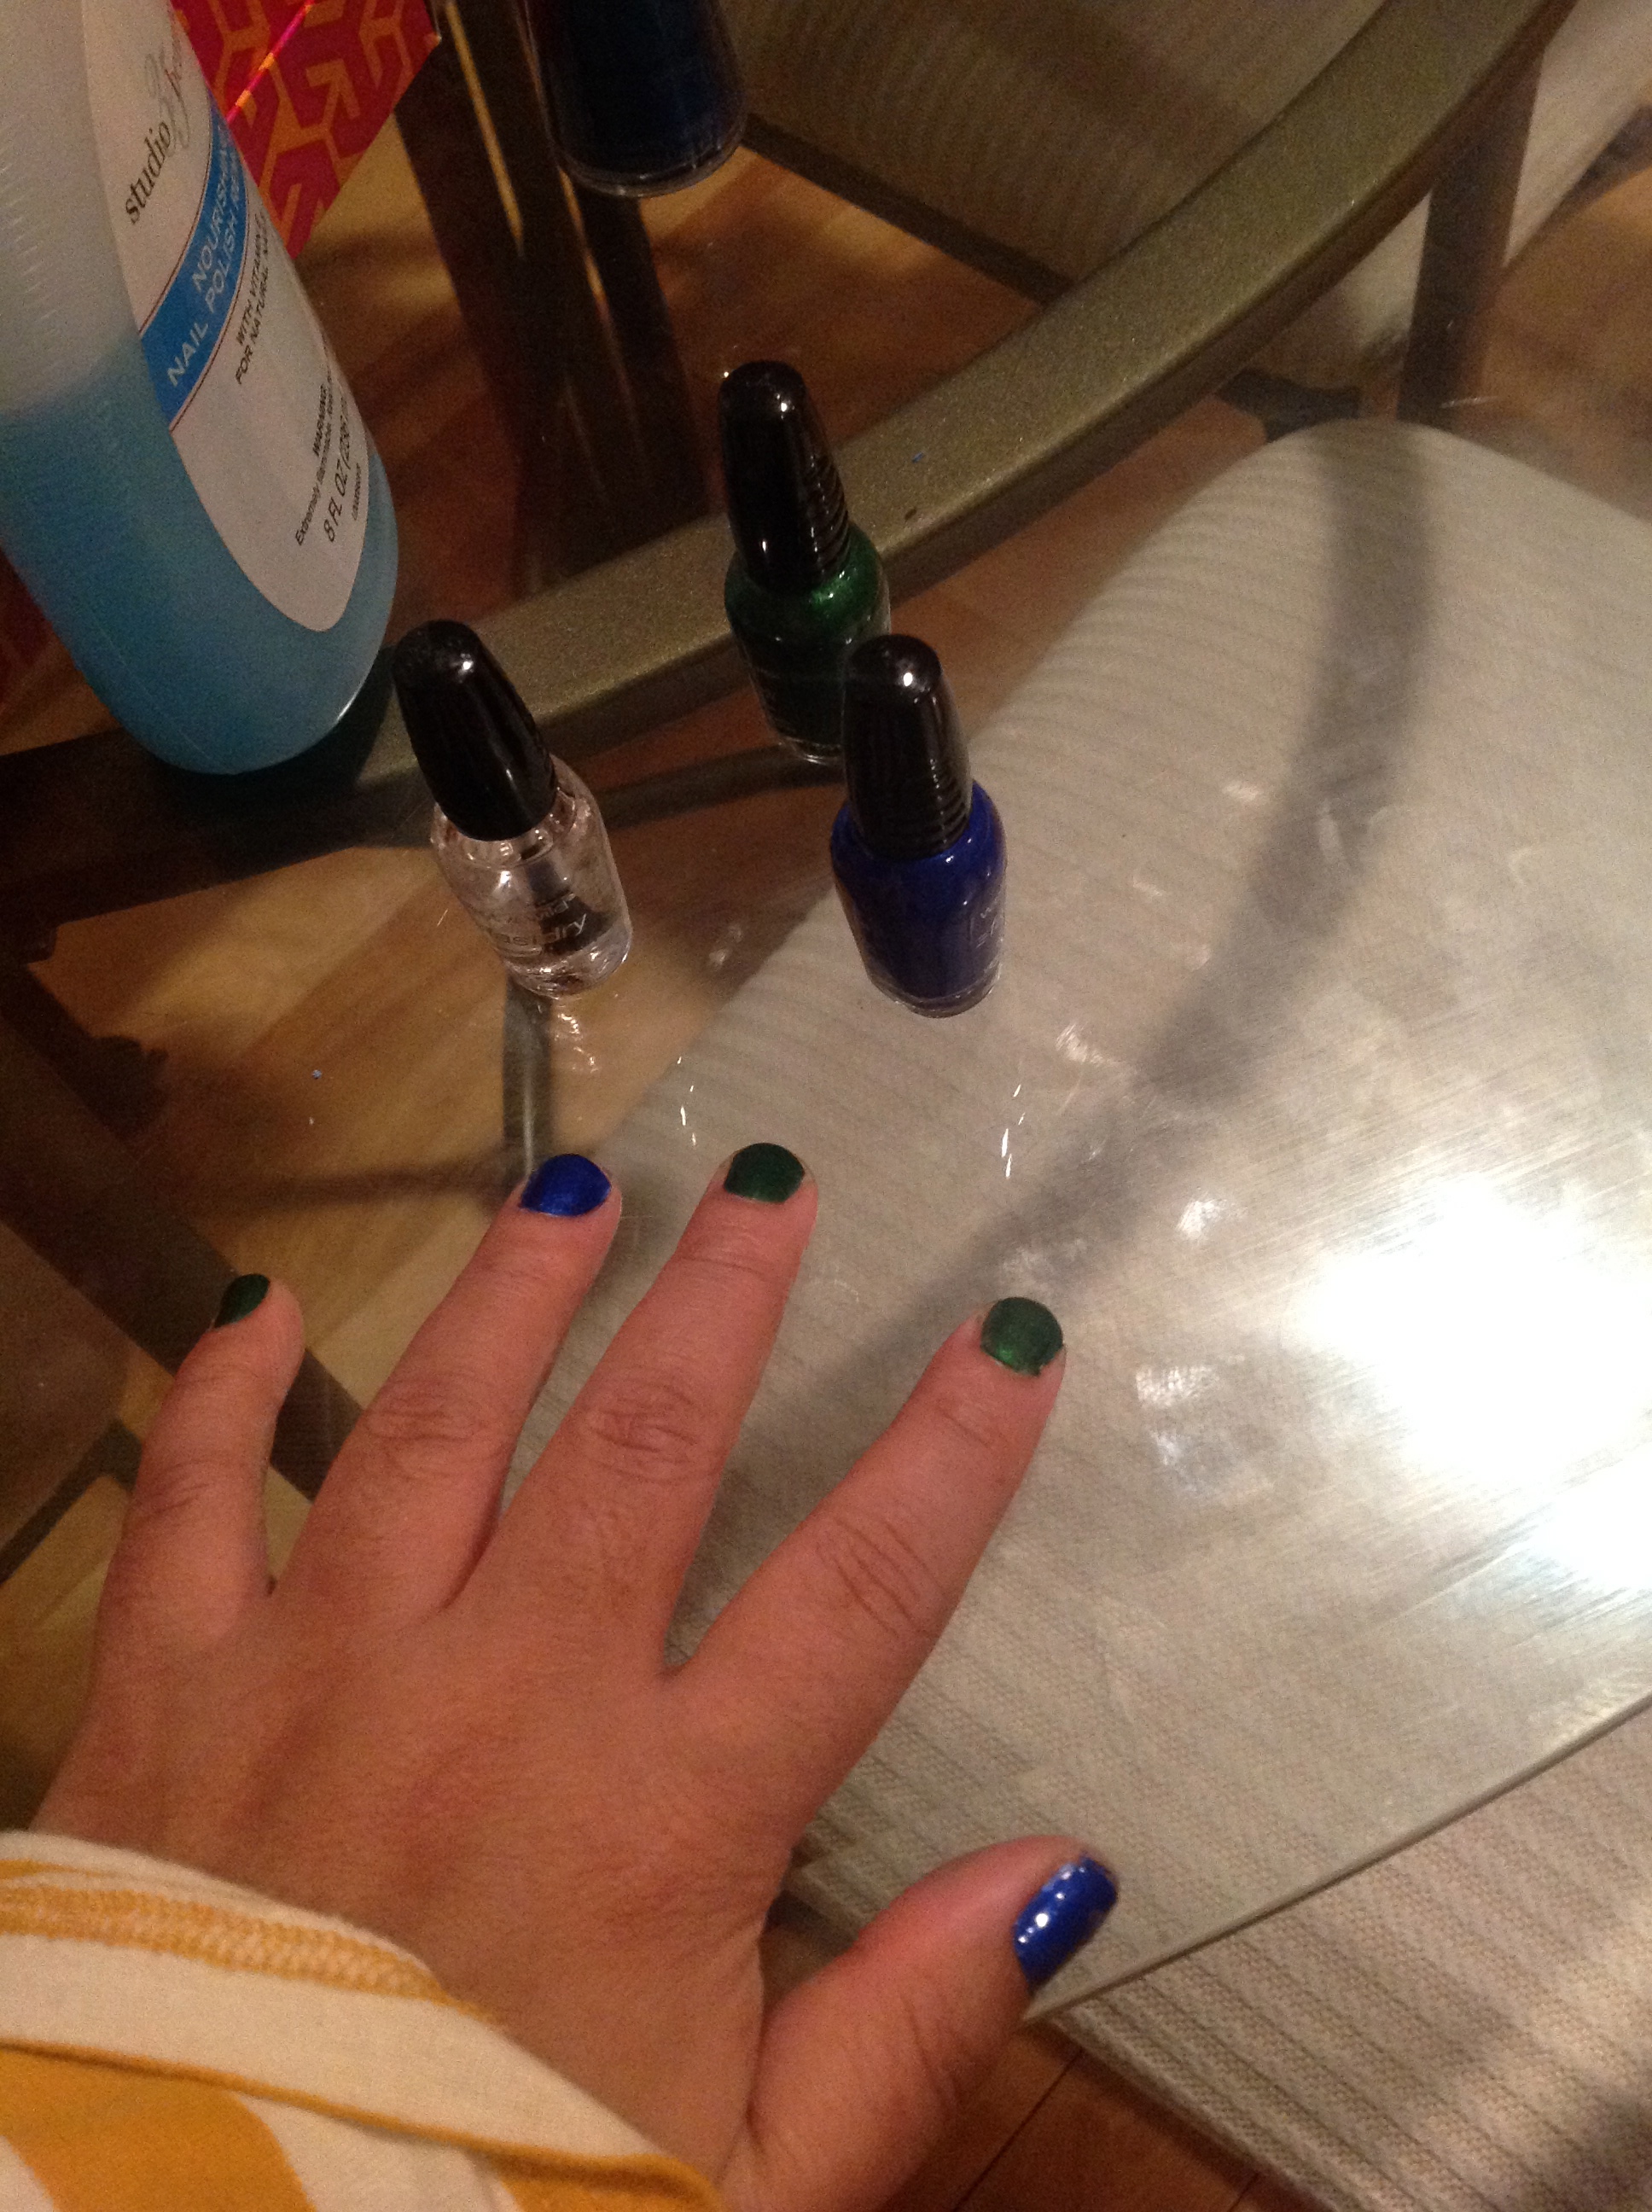 painted my nails blue and green!